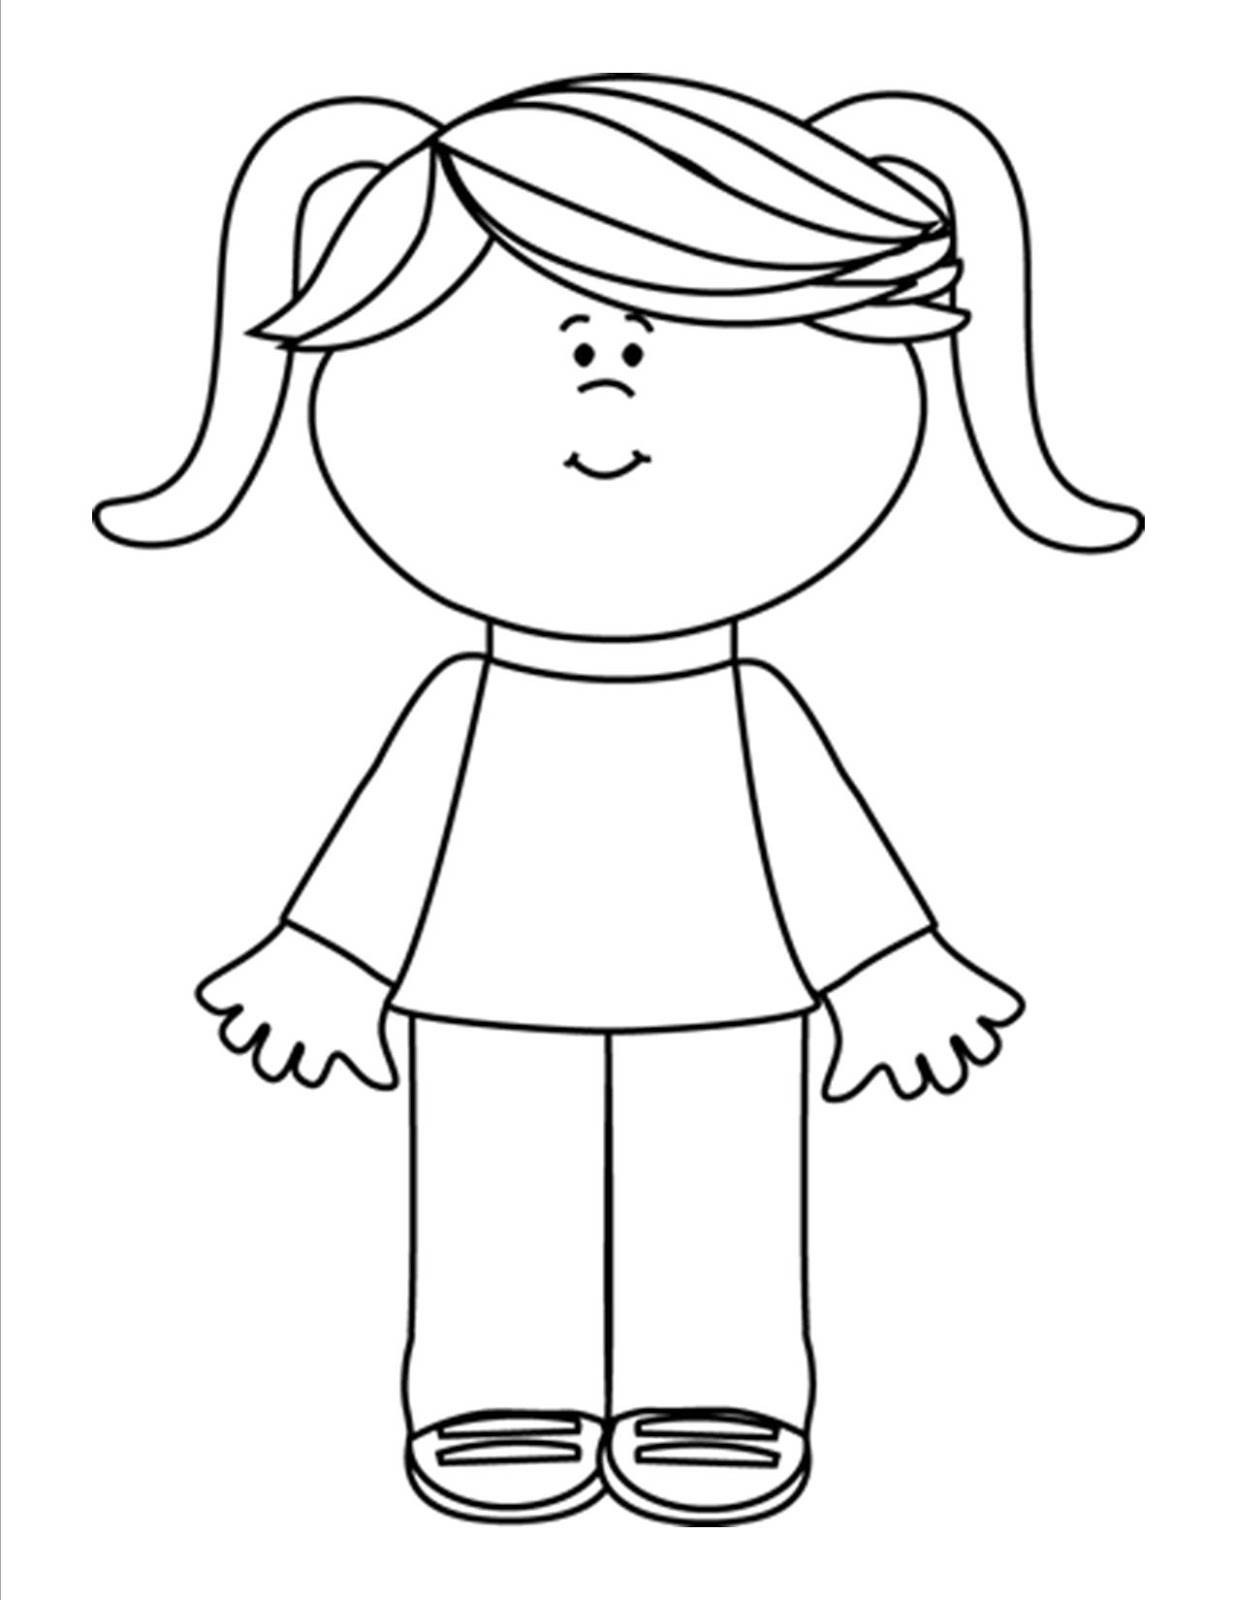 Girls clipart outline. Girl cliparts zone 